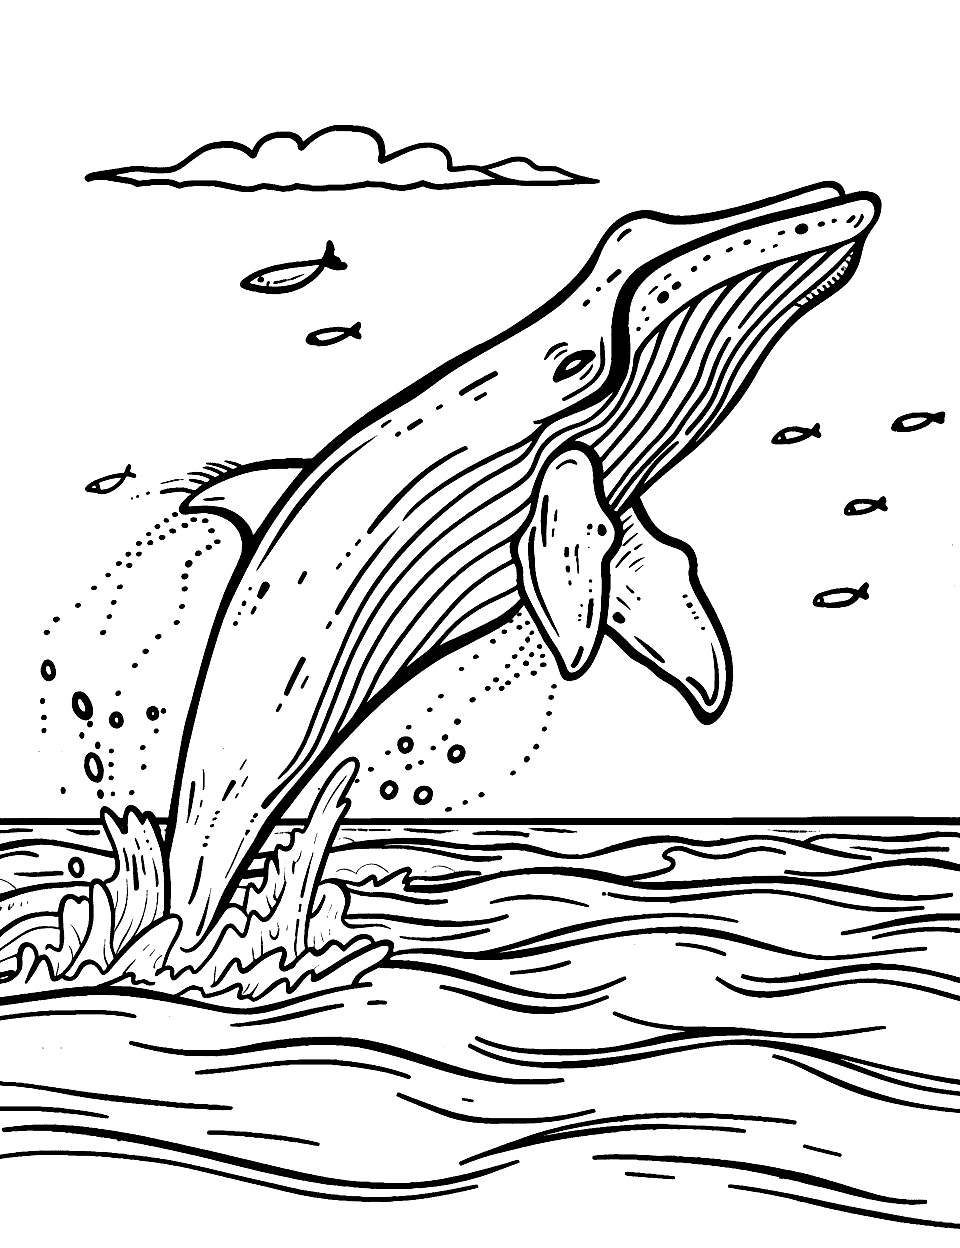 Whale Breaching in Open Ocean Sea Creature Coloring Page - A majestic whale leaps out of the water in the vast open ocean.